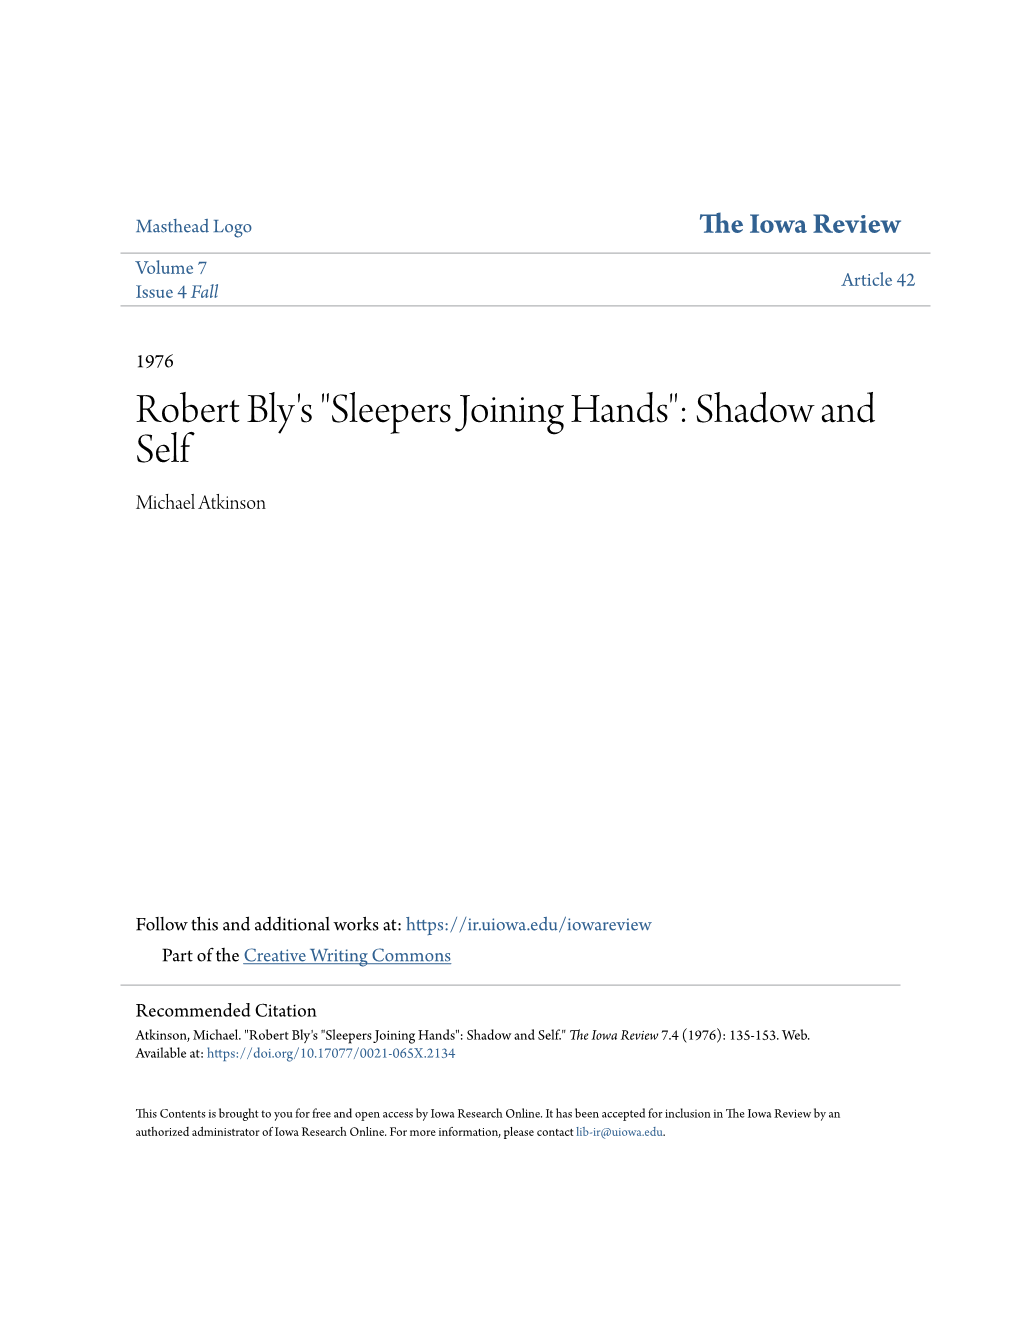 Robert Bly's "Sleepers Joining Hands": Shadow and Self Michael Atkinson